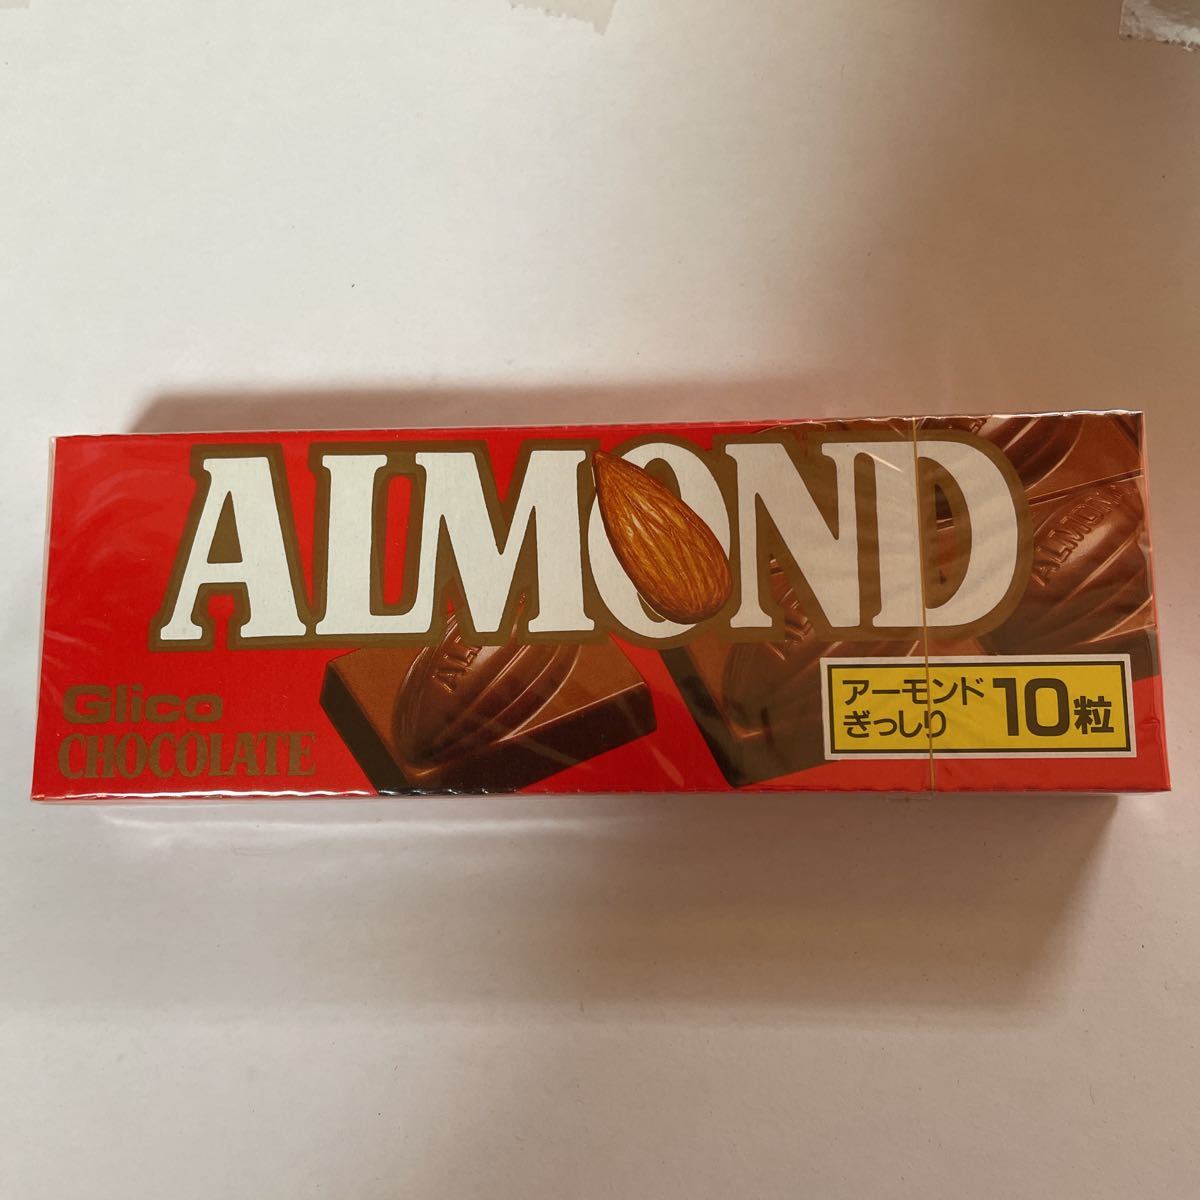  Glyco unopened almond chocolate 1990 period Showa Retro food package 